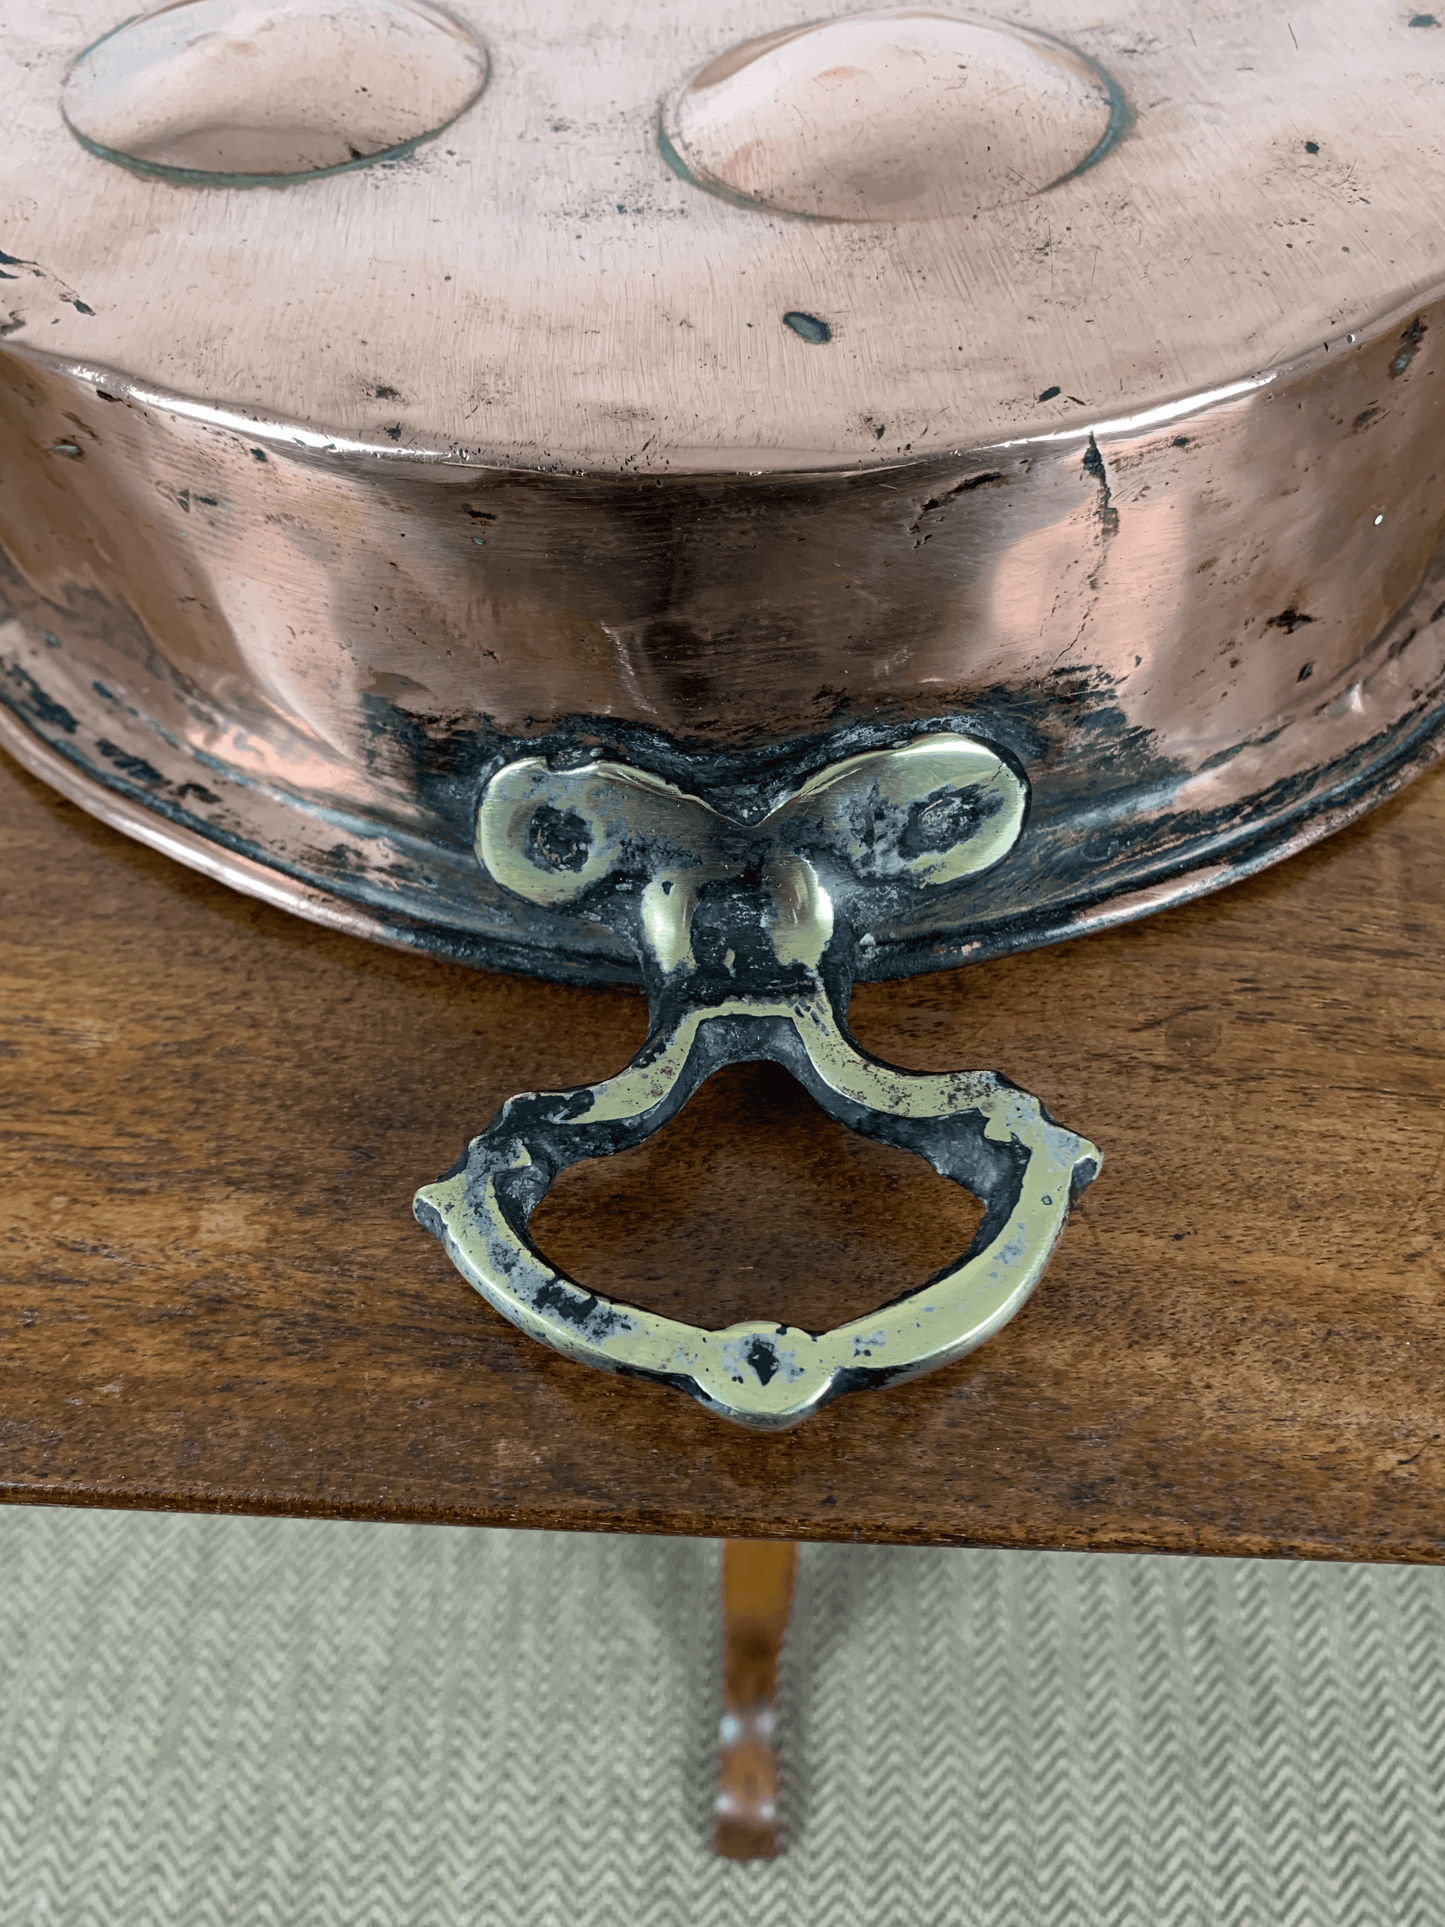 Versatile and Charming: Antique Copper Pot for Your Cooking Delights